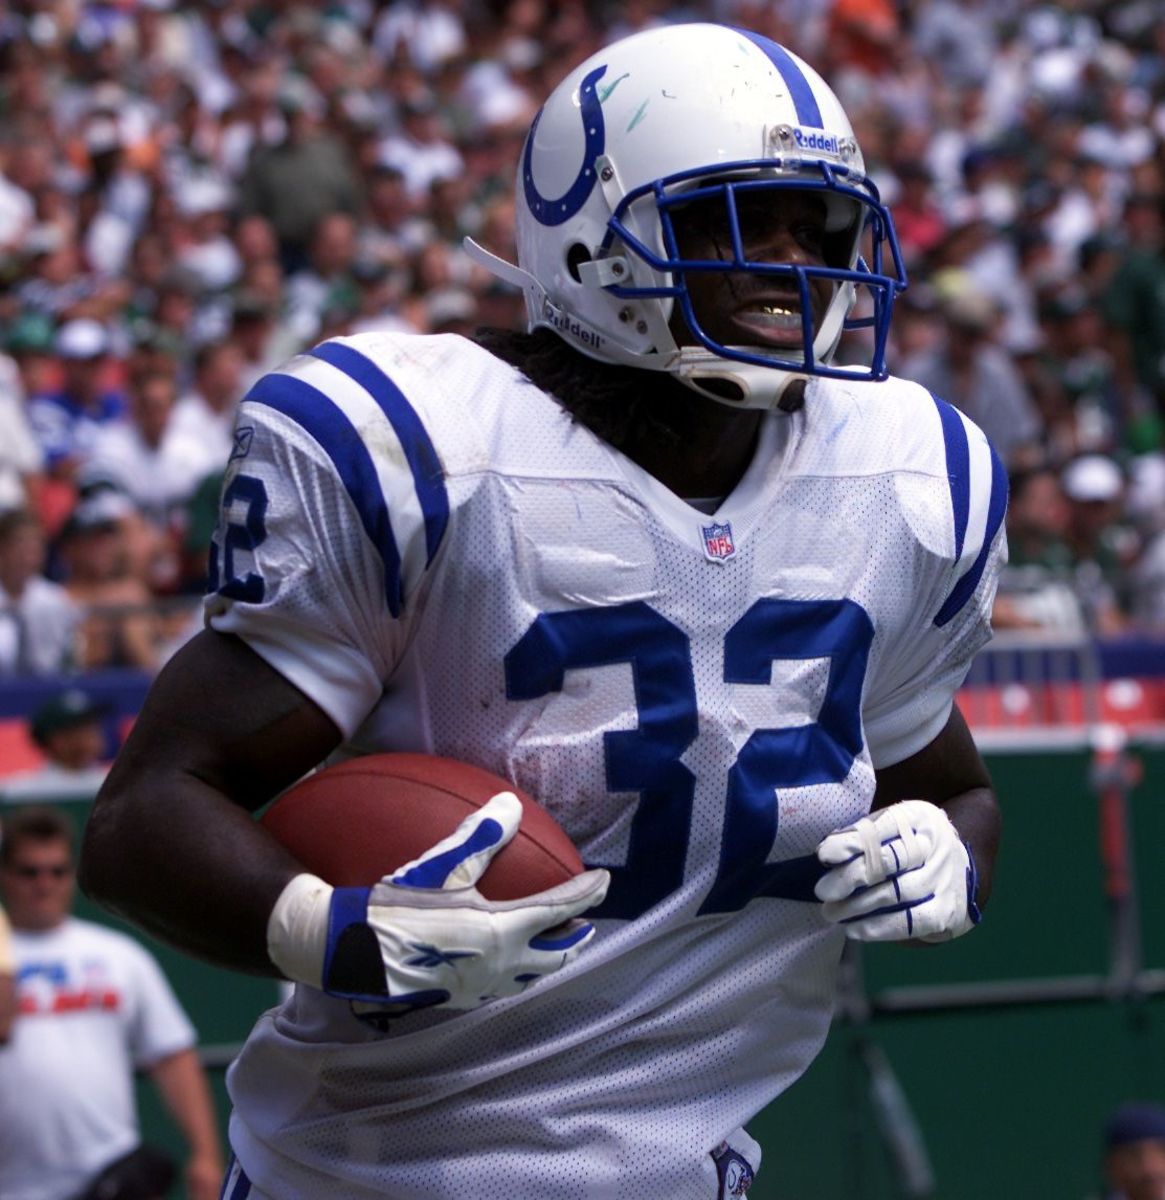 Colts' RB Edgerrin James elected to Hall of Fame